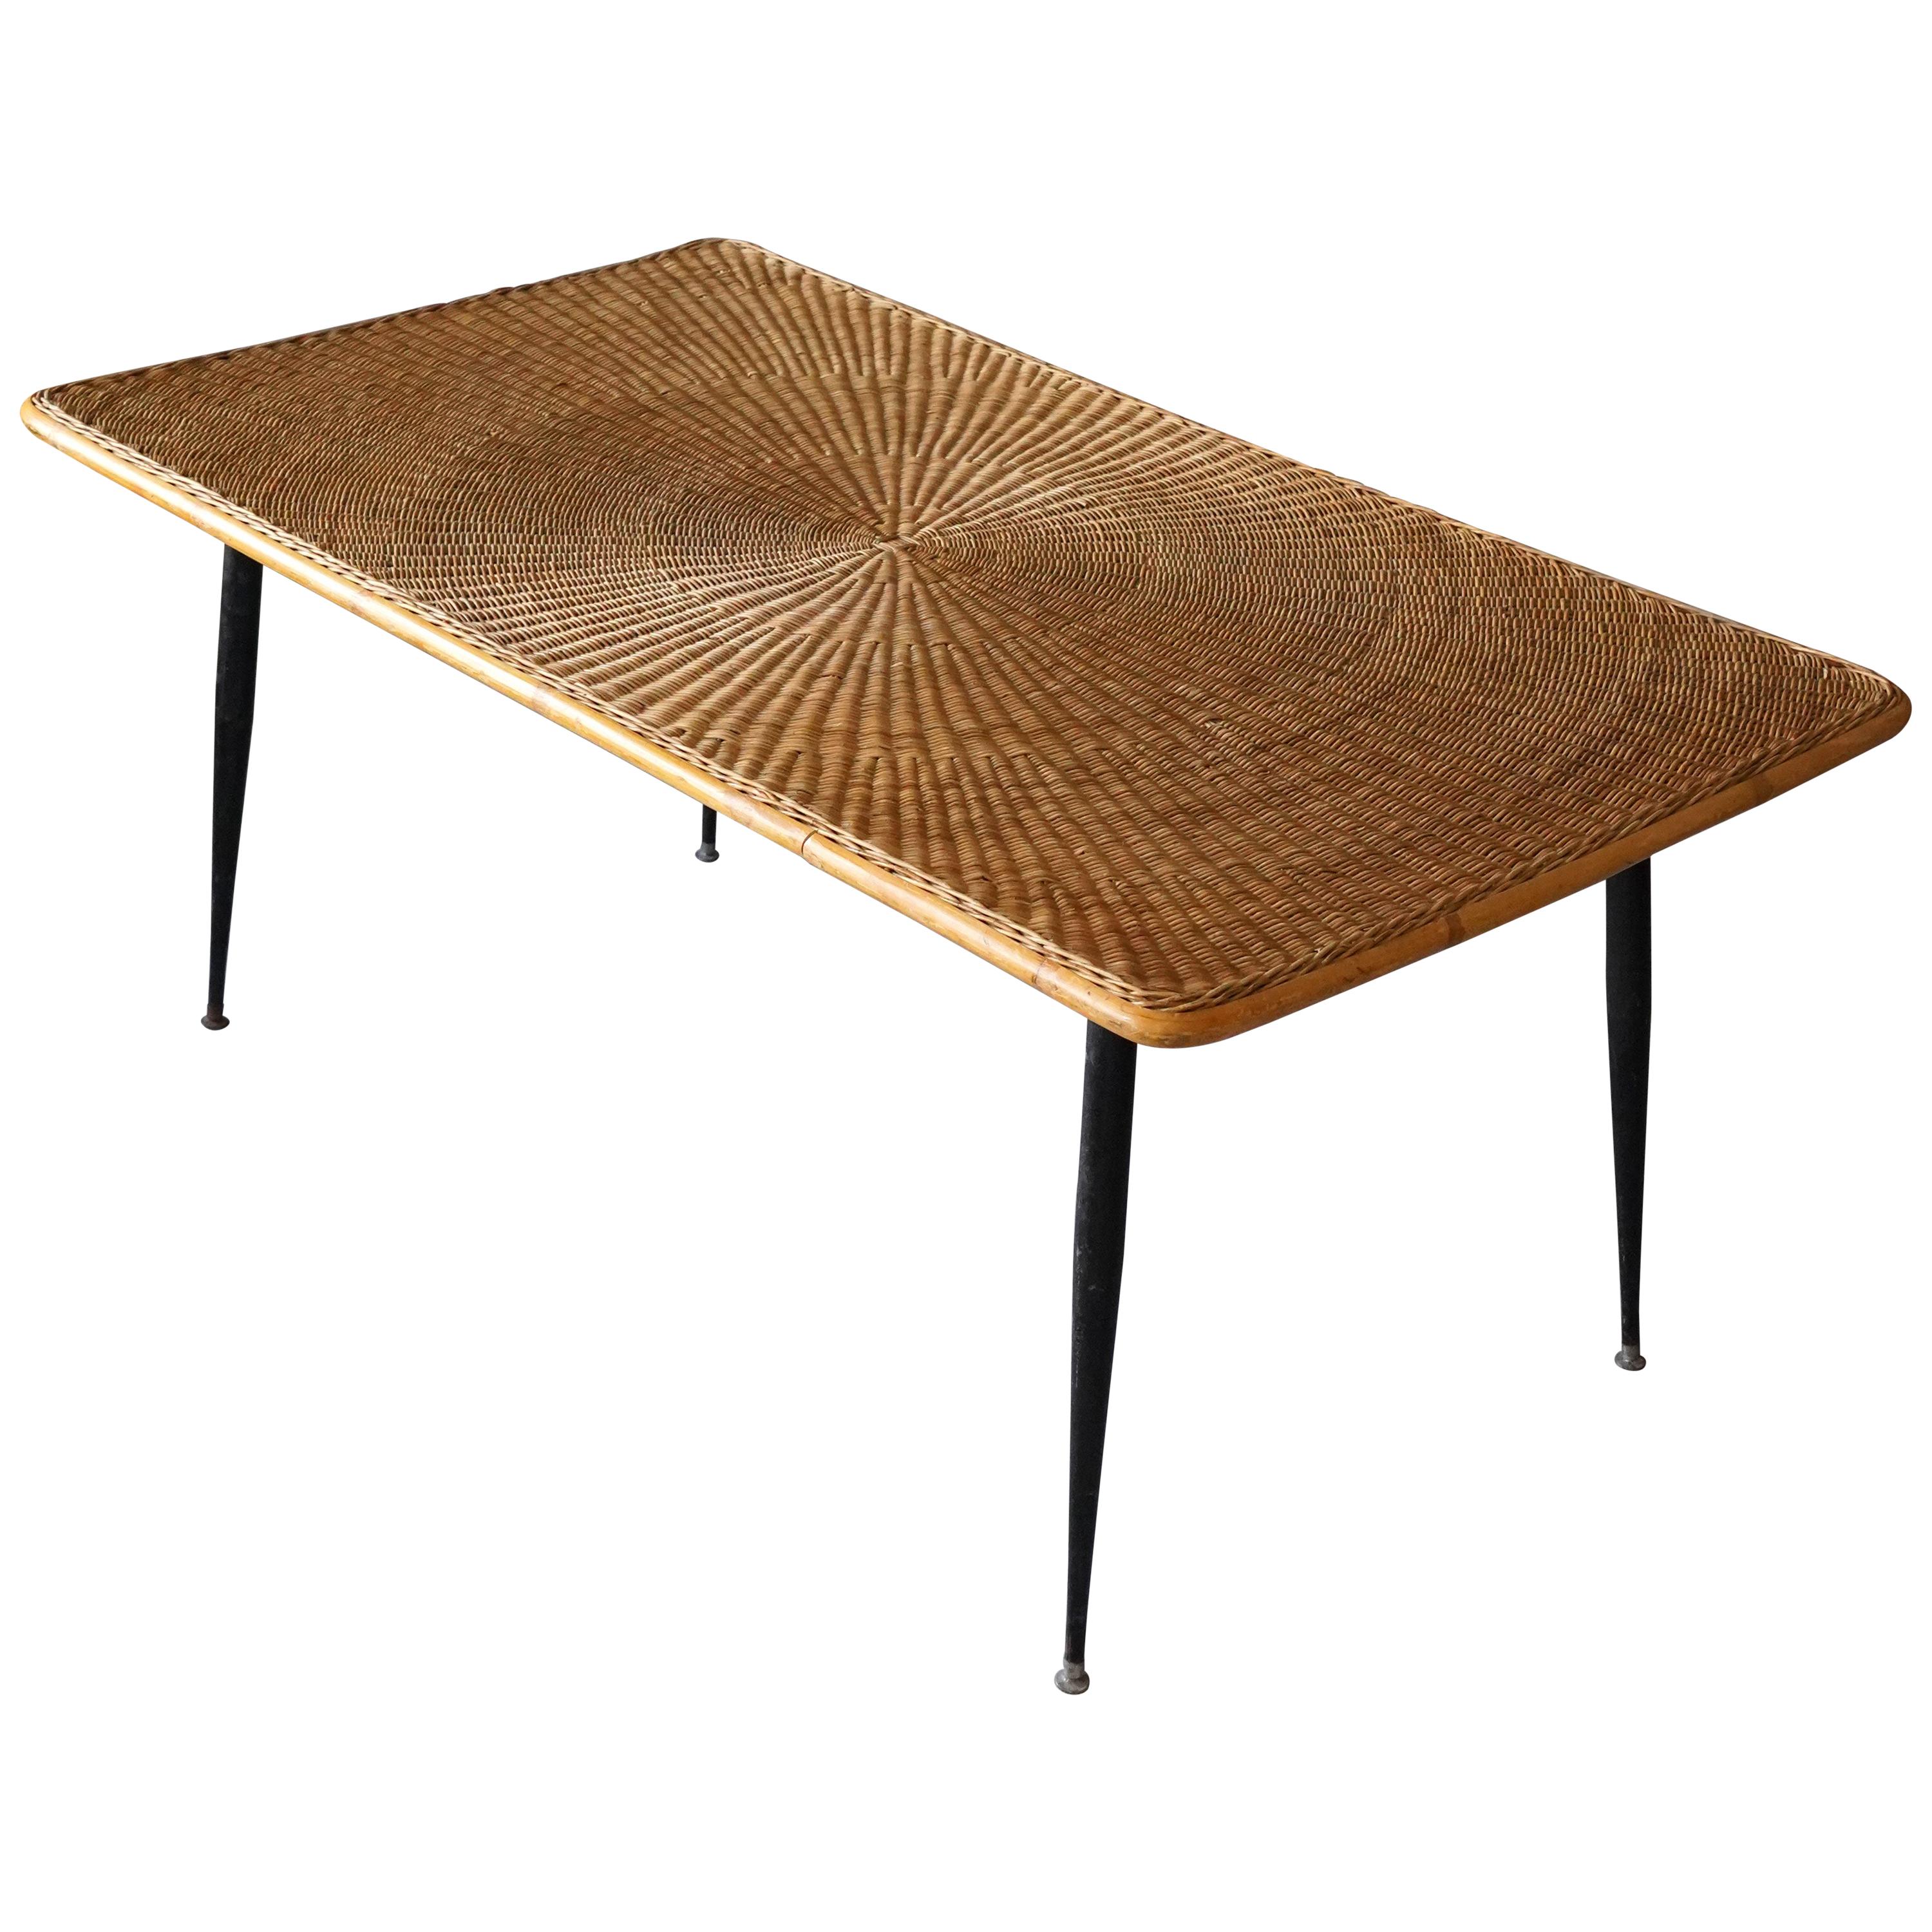 American Designer, Minimalist Dining Table, Woven Rattan, Lacquered Steel, 1950s